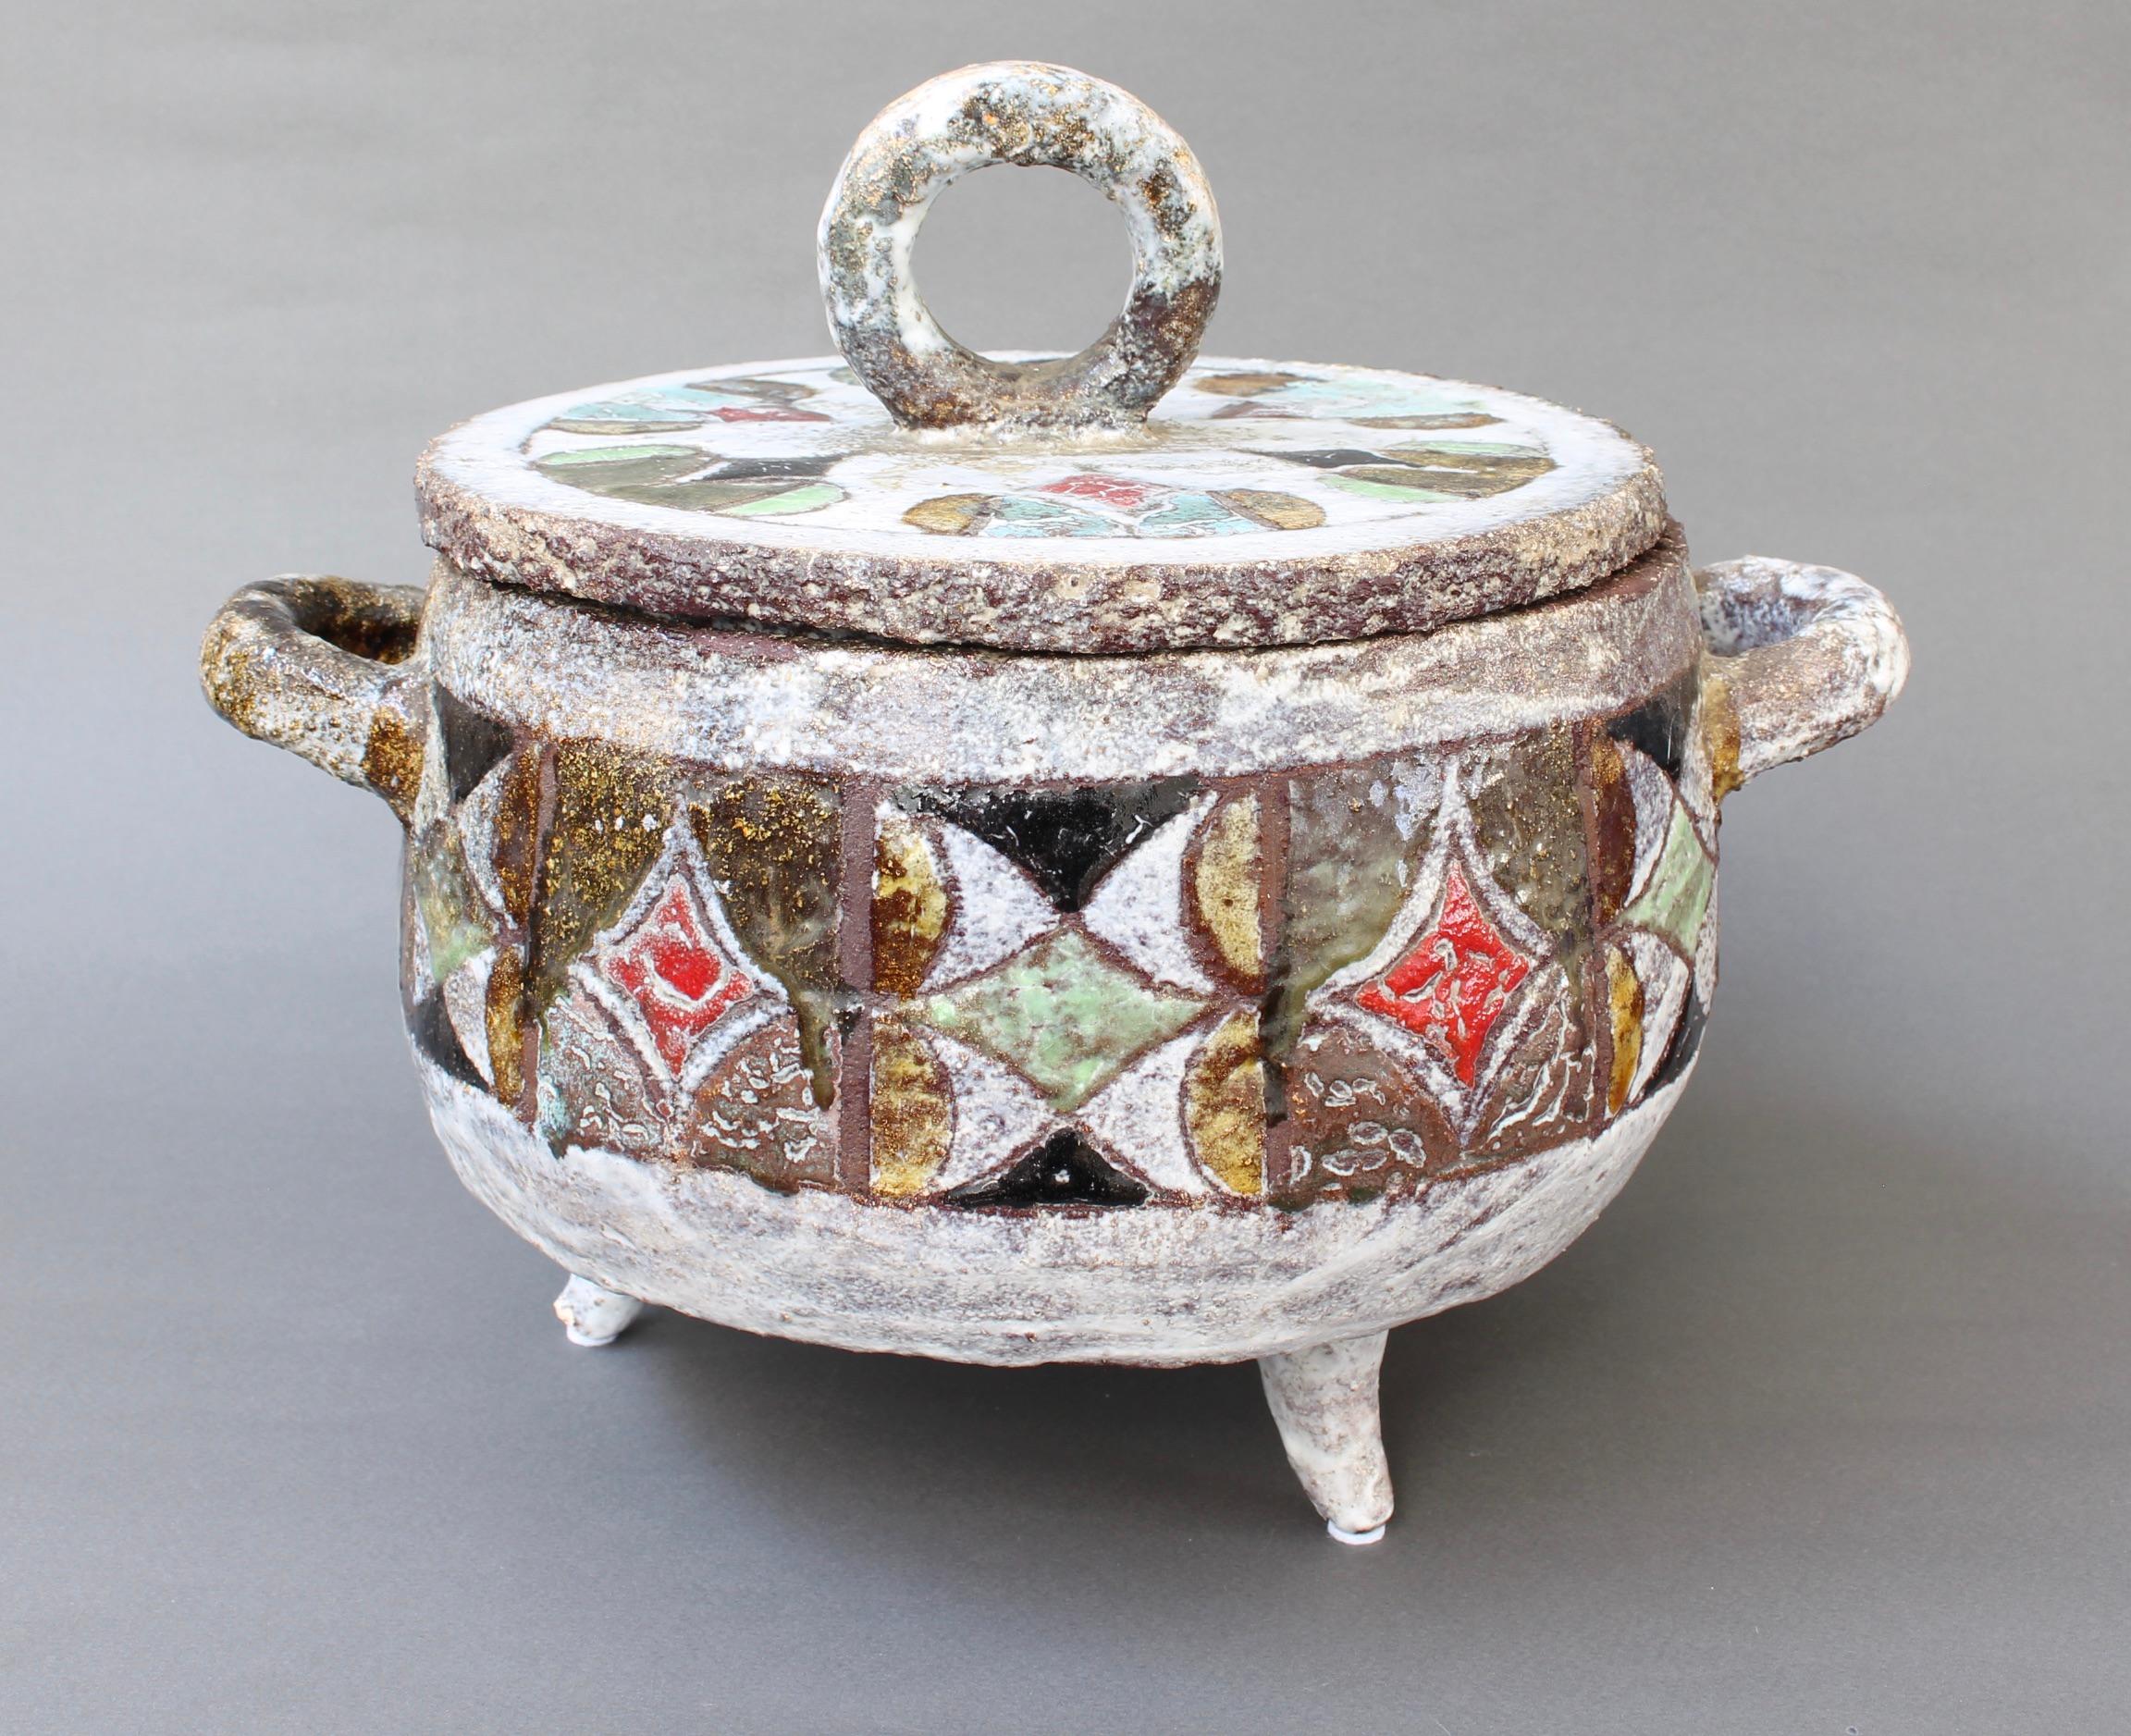 Decorative French ceramic tureen by Fernande Kohler (c. 1960s). Fired Chamotte clay forms the structure of this delightful soup tureen and table centrepiece. The earthenware is accented both on the base and the lid by hand-decorated coloured enamel